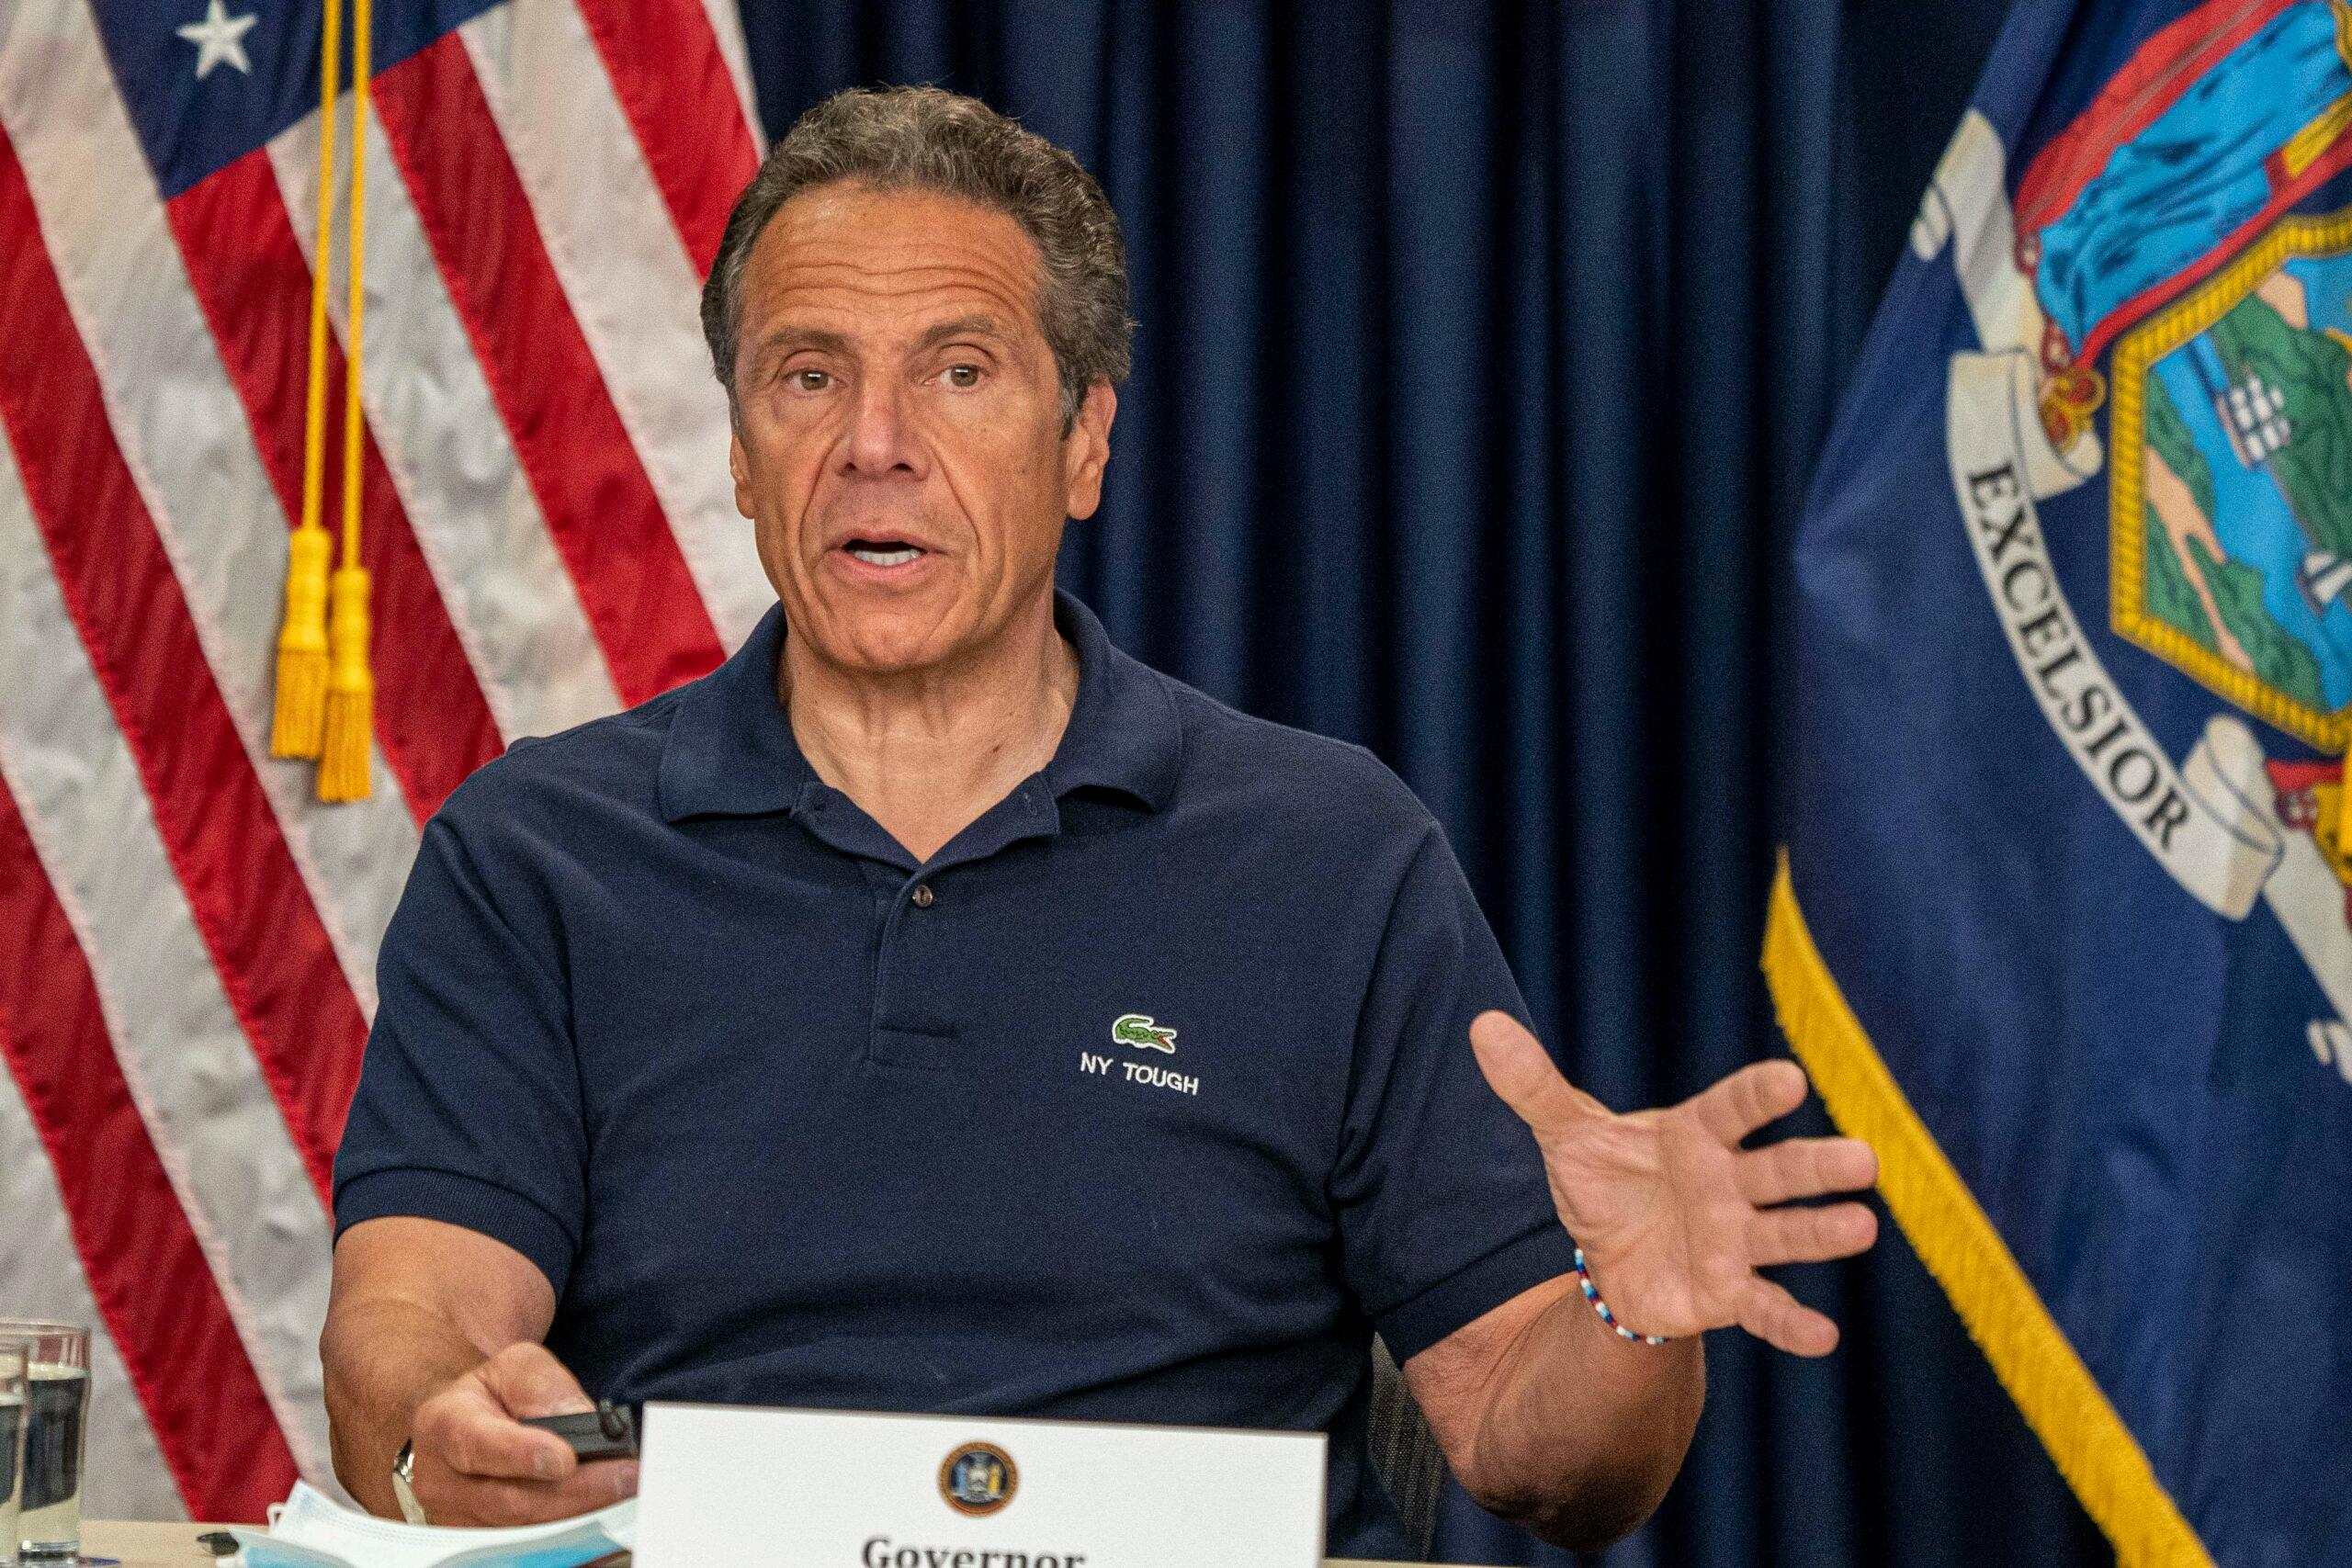 Governor Cuomo announces that Western New York will enter Phase 3 of reopening next week